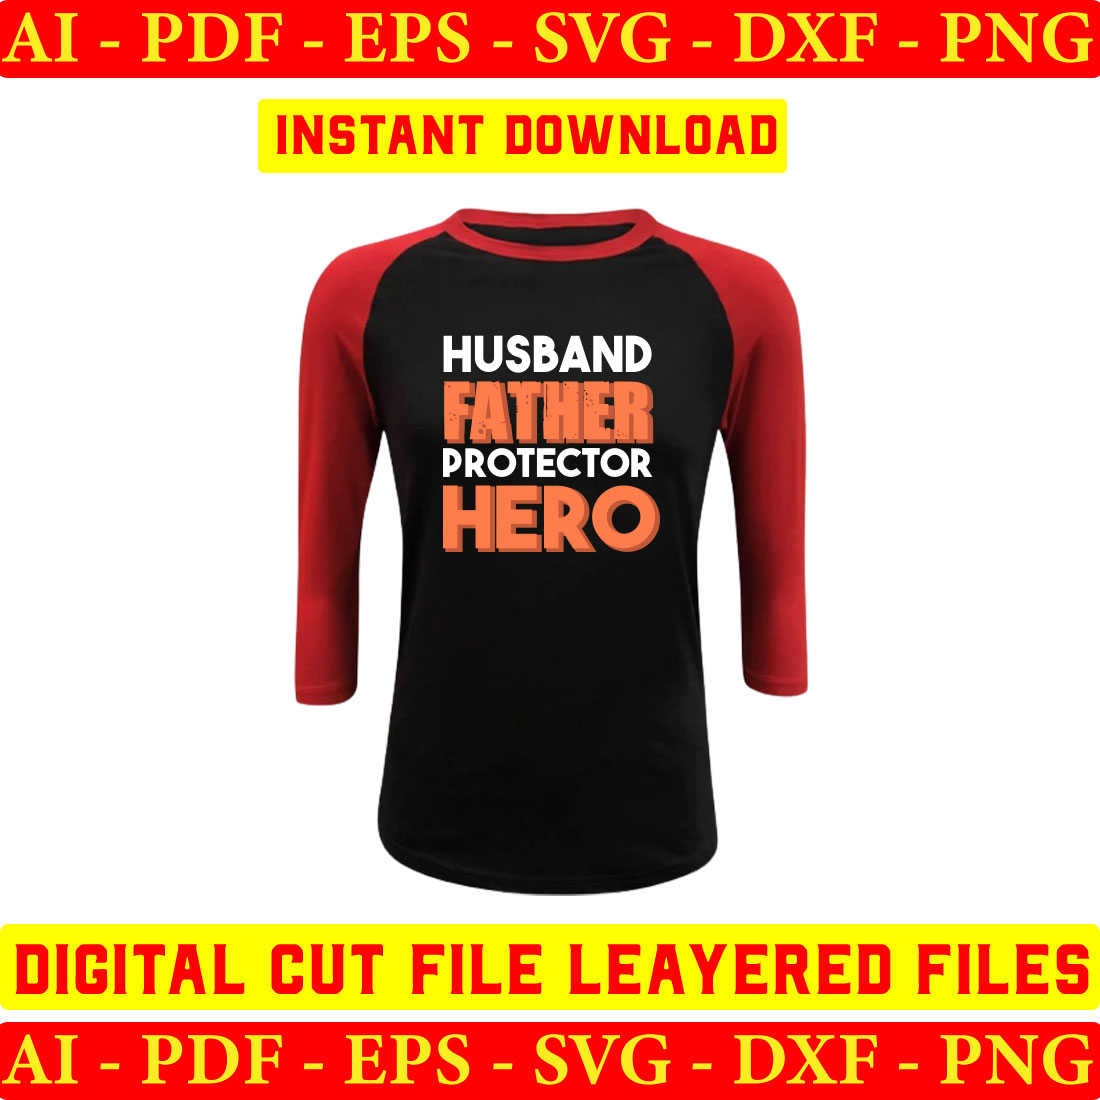 Black and red shirt with the words husband father protector hero.